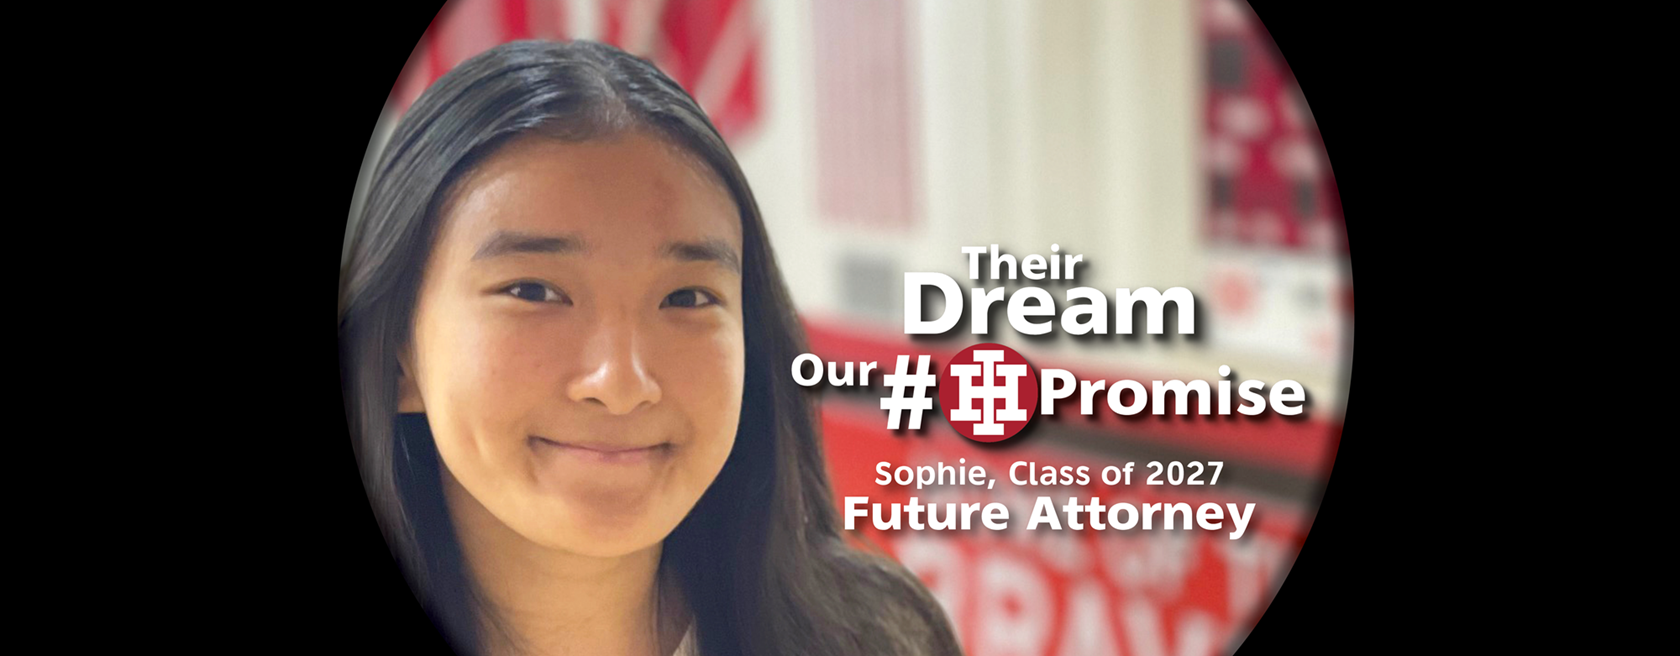 Their Dream Our Promise - Sophie, Class of 2025, Future Attorney